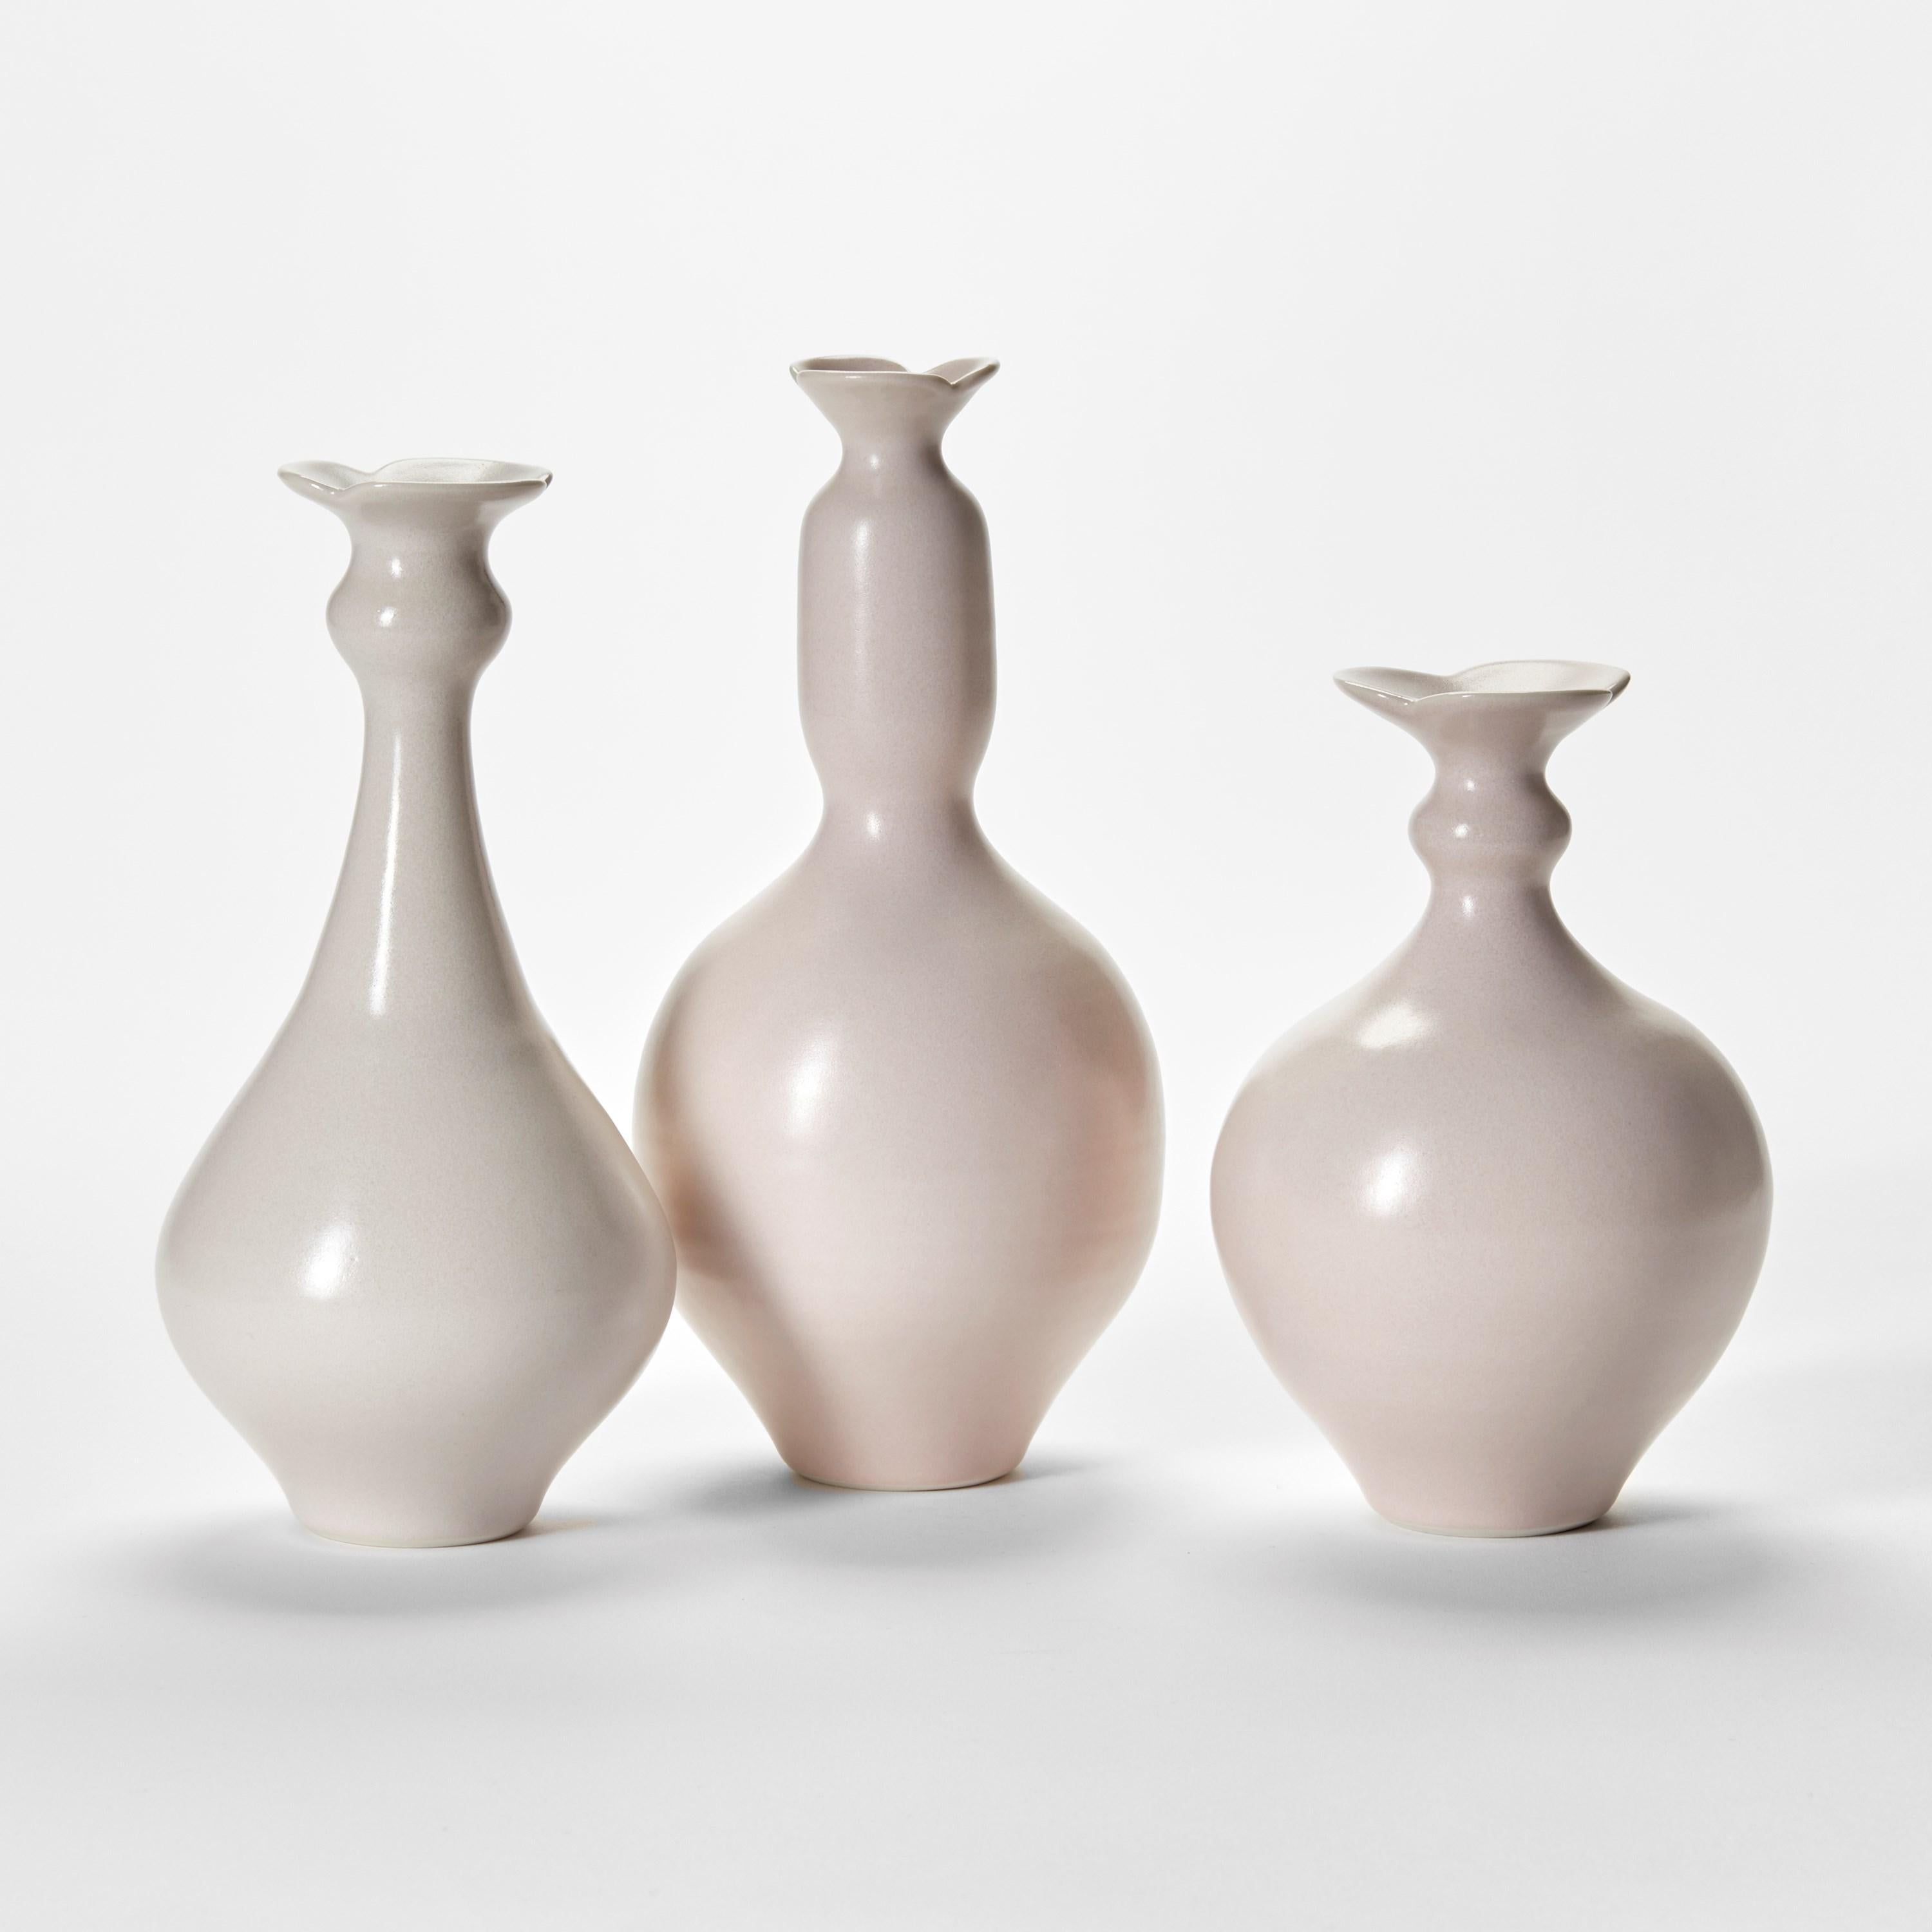 'Pink Trio’ is a unique collection of porcelain sculptural vessels by the British artist, Vivienne Foley.

Left to right in the first image;

Pink Thistle Bottle  H 23cm W 11.5 cm D 11.5 cm
Pink Thistle Bottle II  H 25 cm W 11.5 cm D 11.5 cm
Pink